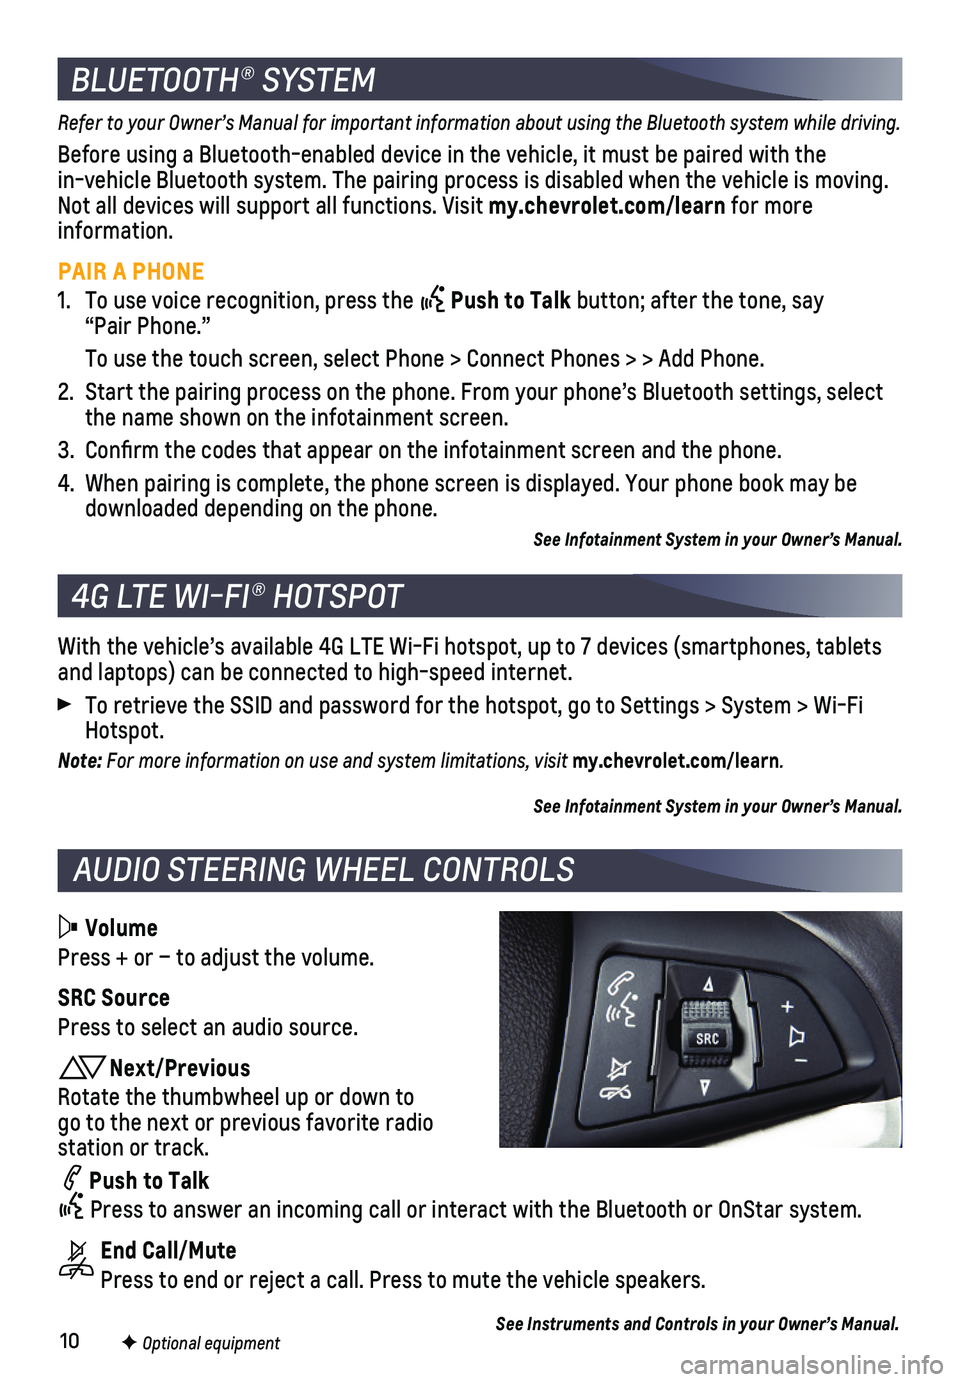 CHEVROLET SONIC 2020  Get To Know Guide 10
 Volume
Press + or – to adjust the volume.
SRC Source
Press to select an audio source.
Next/Previous
Rotate the thumbwheel up or down to go to the next or  previous favorite radio  
station or 